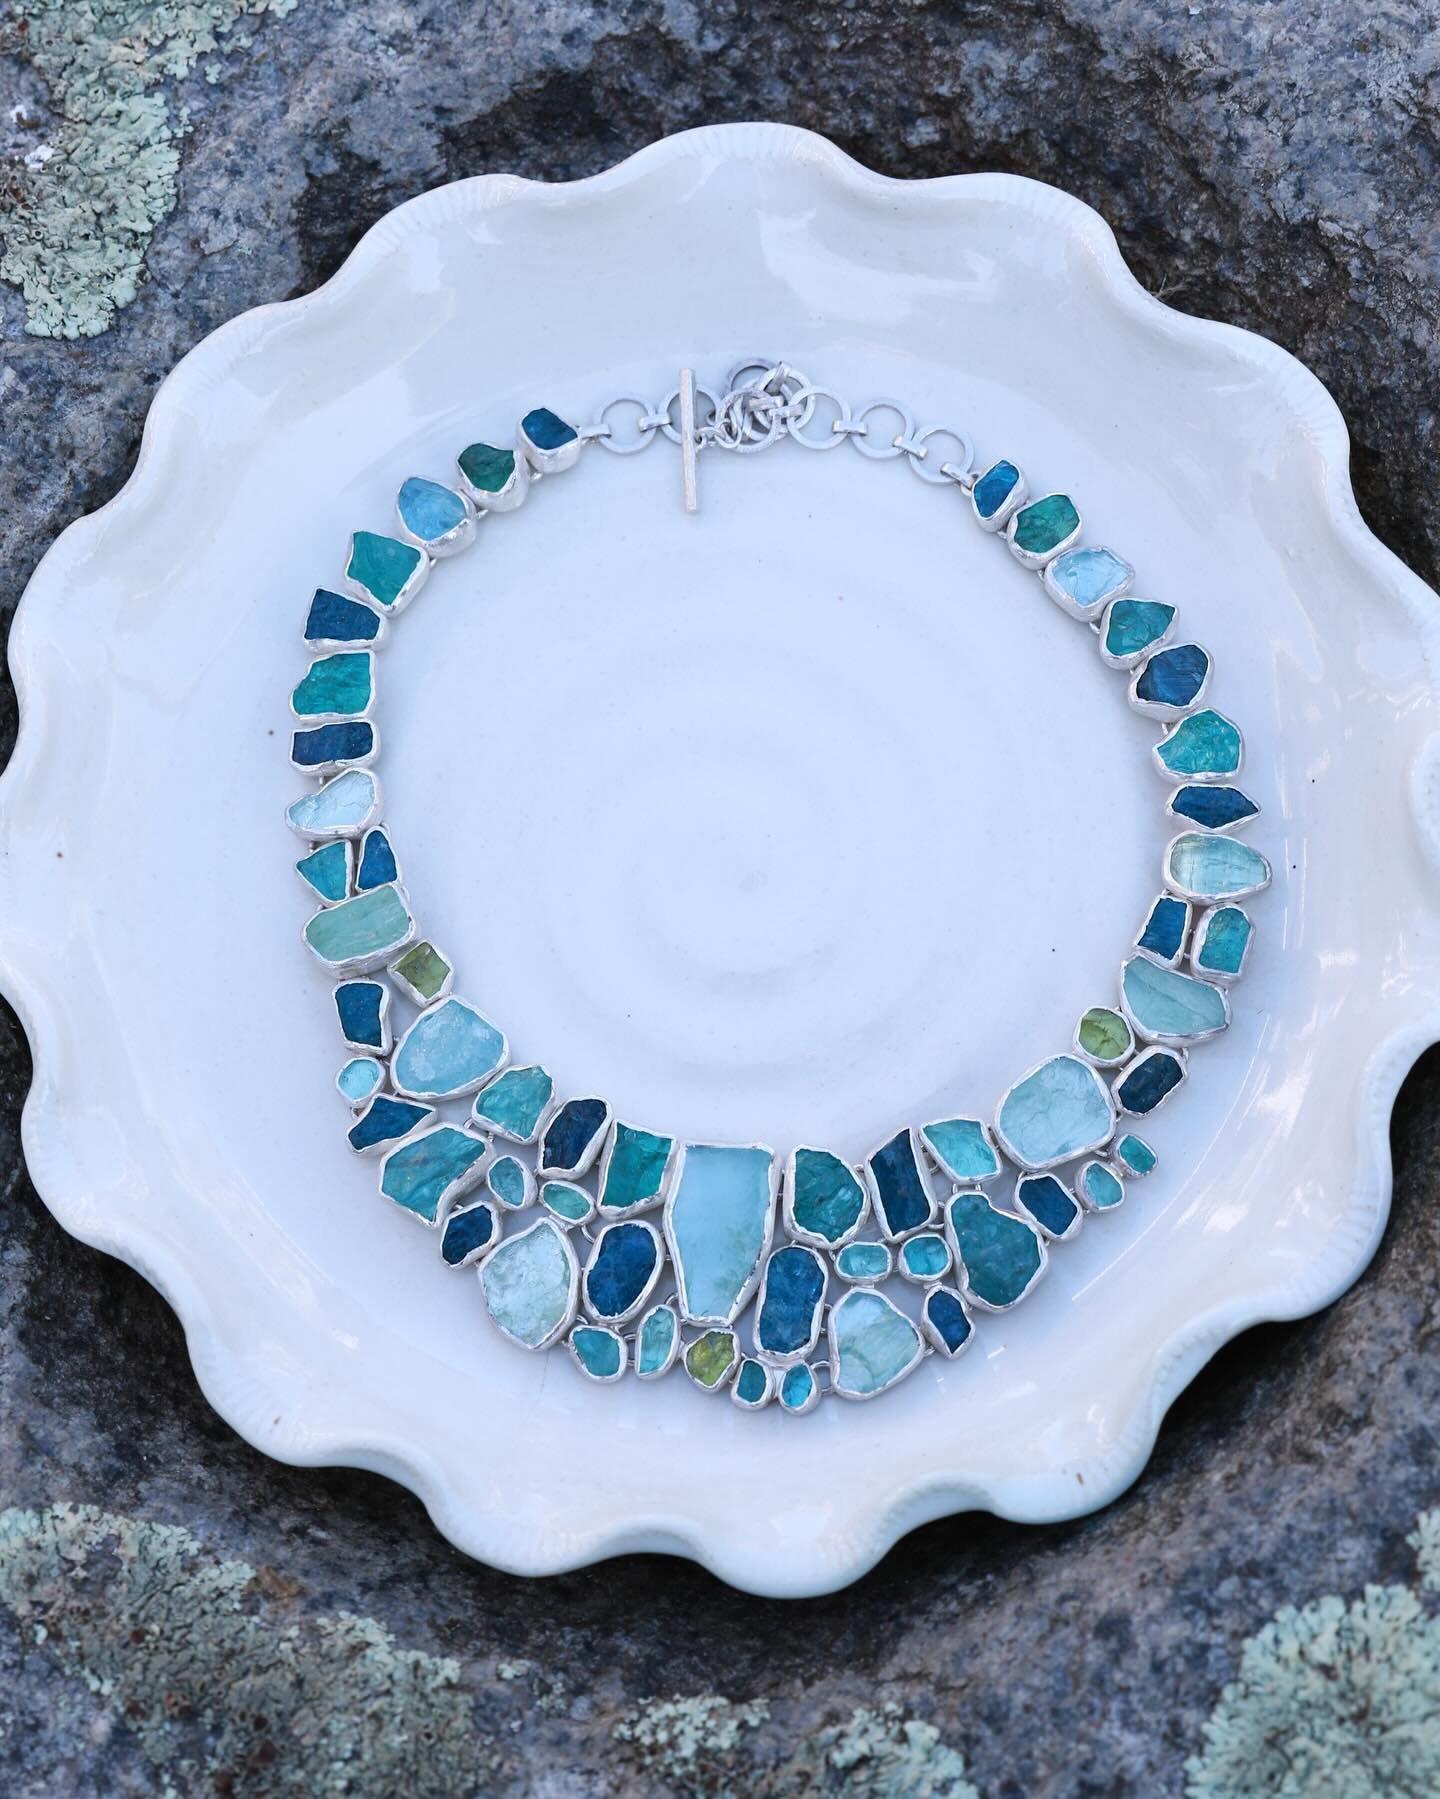 Channeling raw beauty with this chunky aquamarine necklace in sterling silver💎✨ 

Handcrafted by Michael Conner 

#NaturalElegance #RawBeauty #statementnecklace #sterlingsilver #silverjewelry #handcrafted #handmadejewelry #artgallery #fashionjewelry